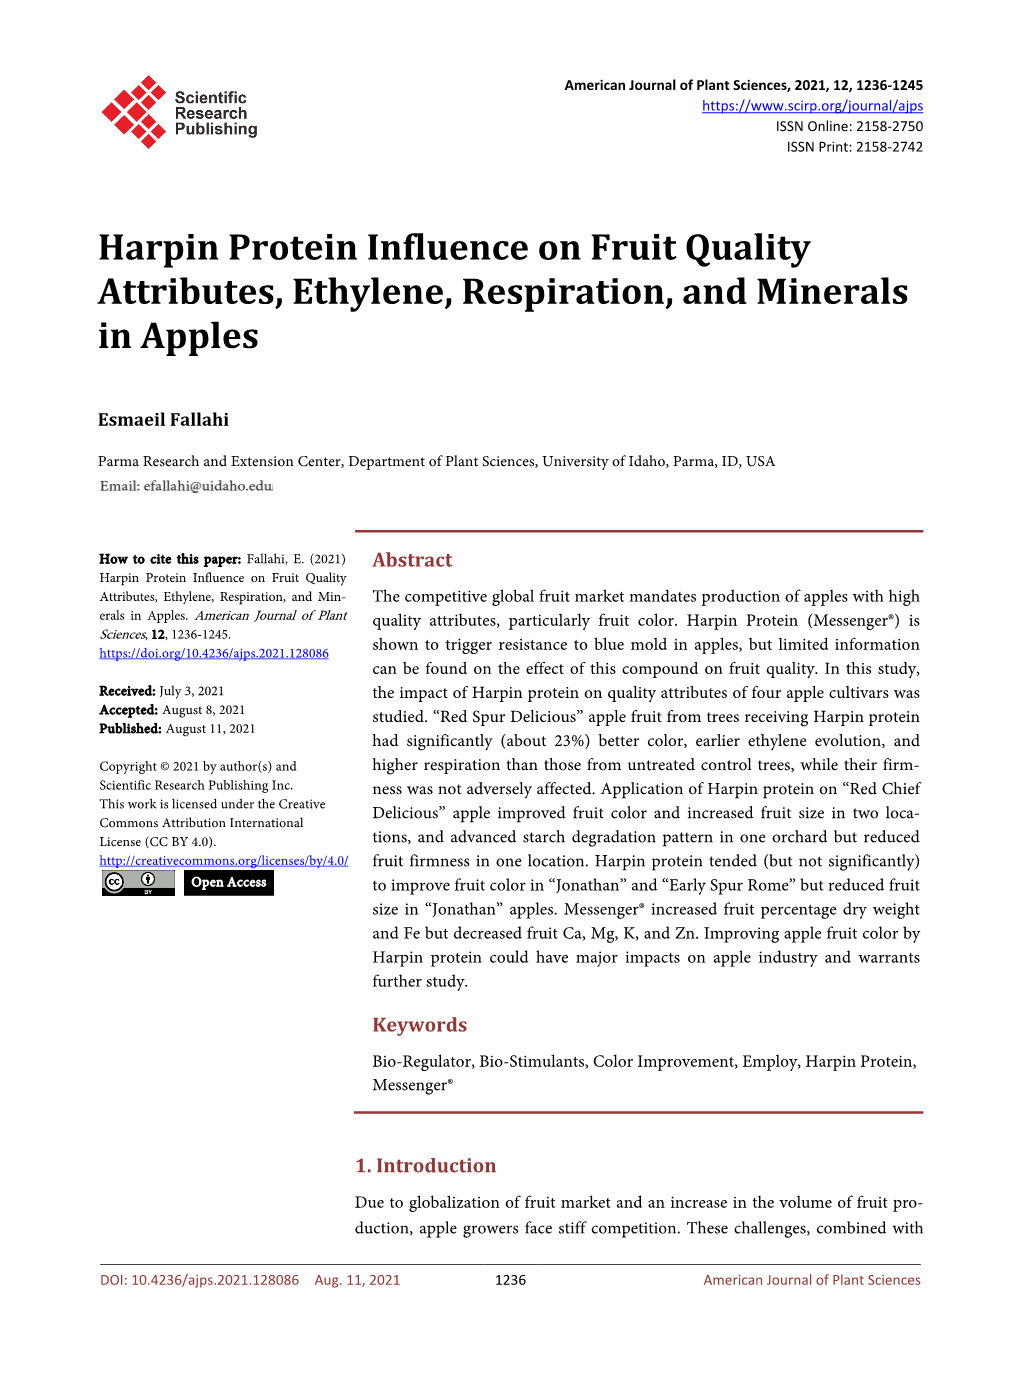 Harpin Protein Influence on Fruit Quality Attributes, Ethylene, Respiration, and Minerals in Apples